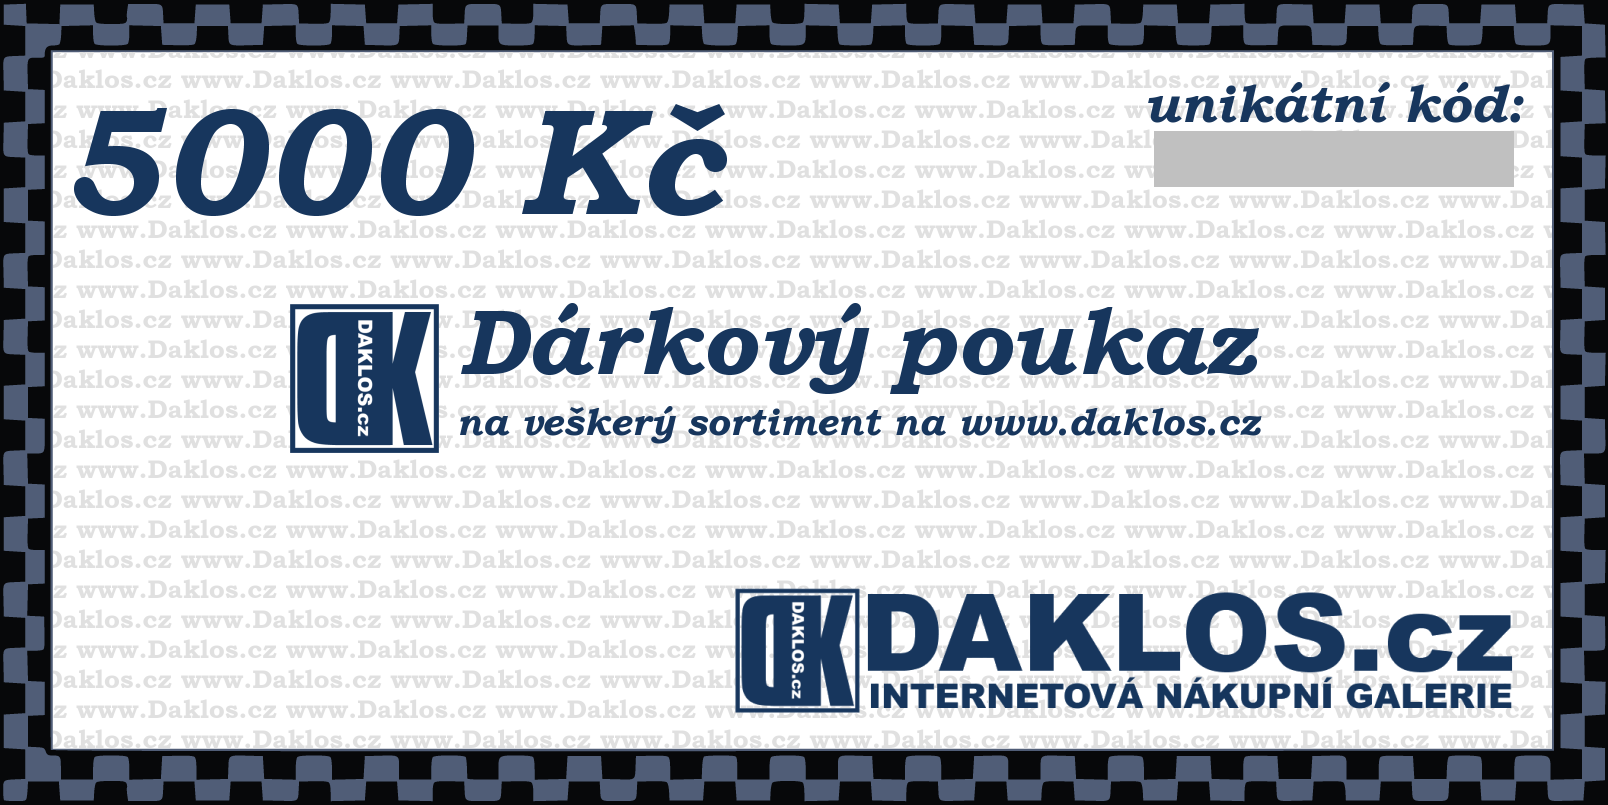 http://www.daklos.cz/index.php?id_product=1464&controller=product